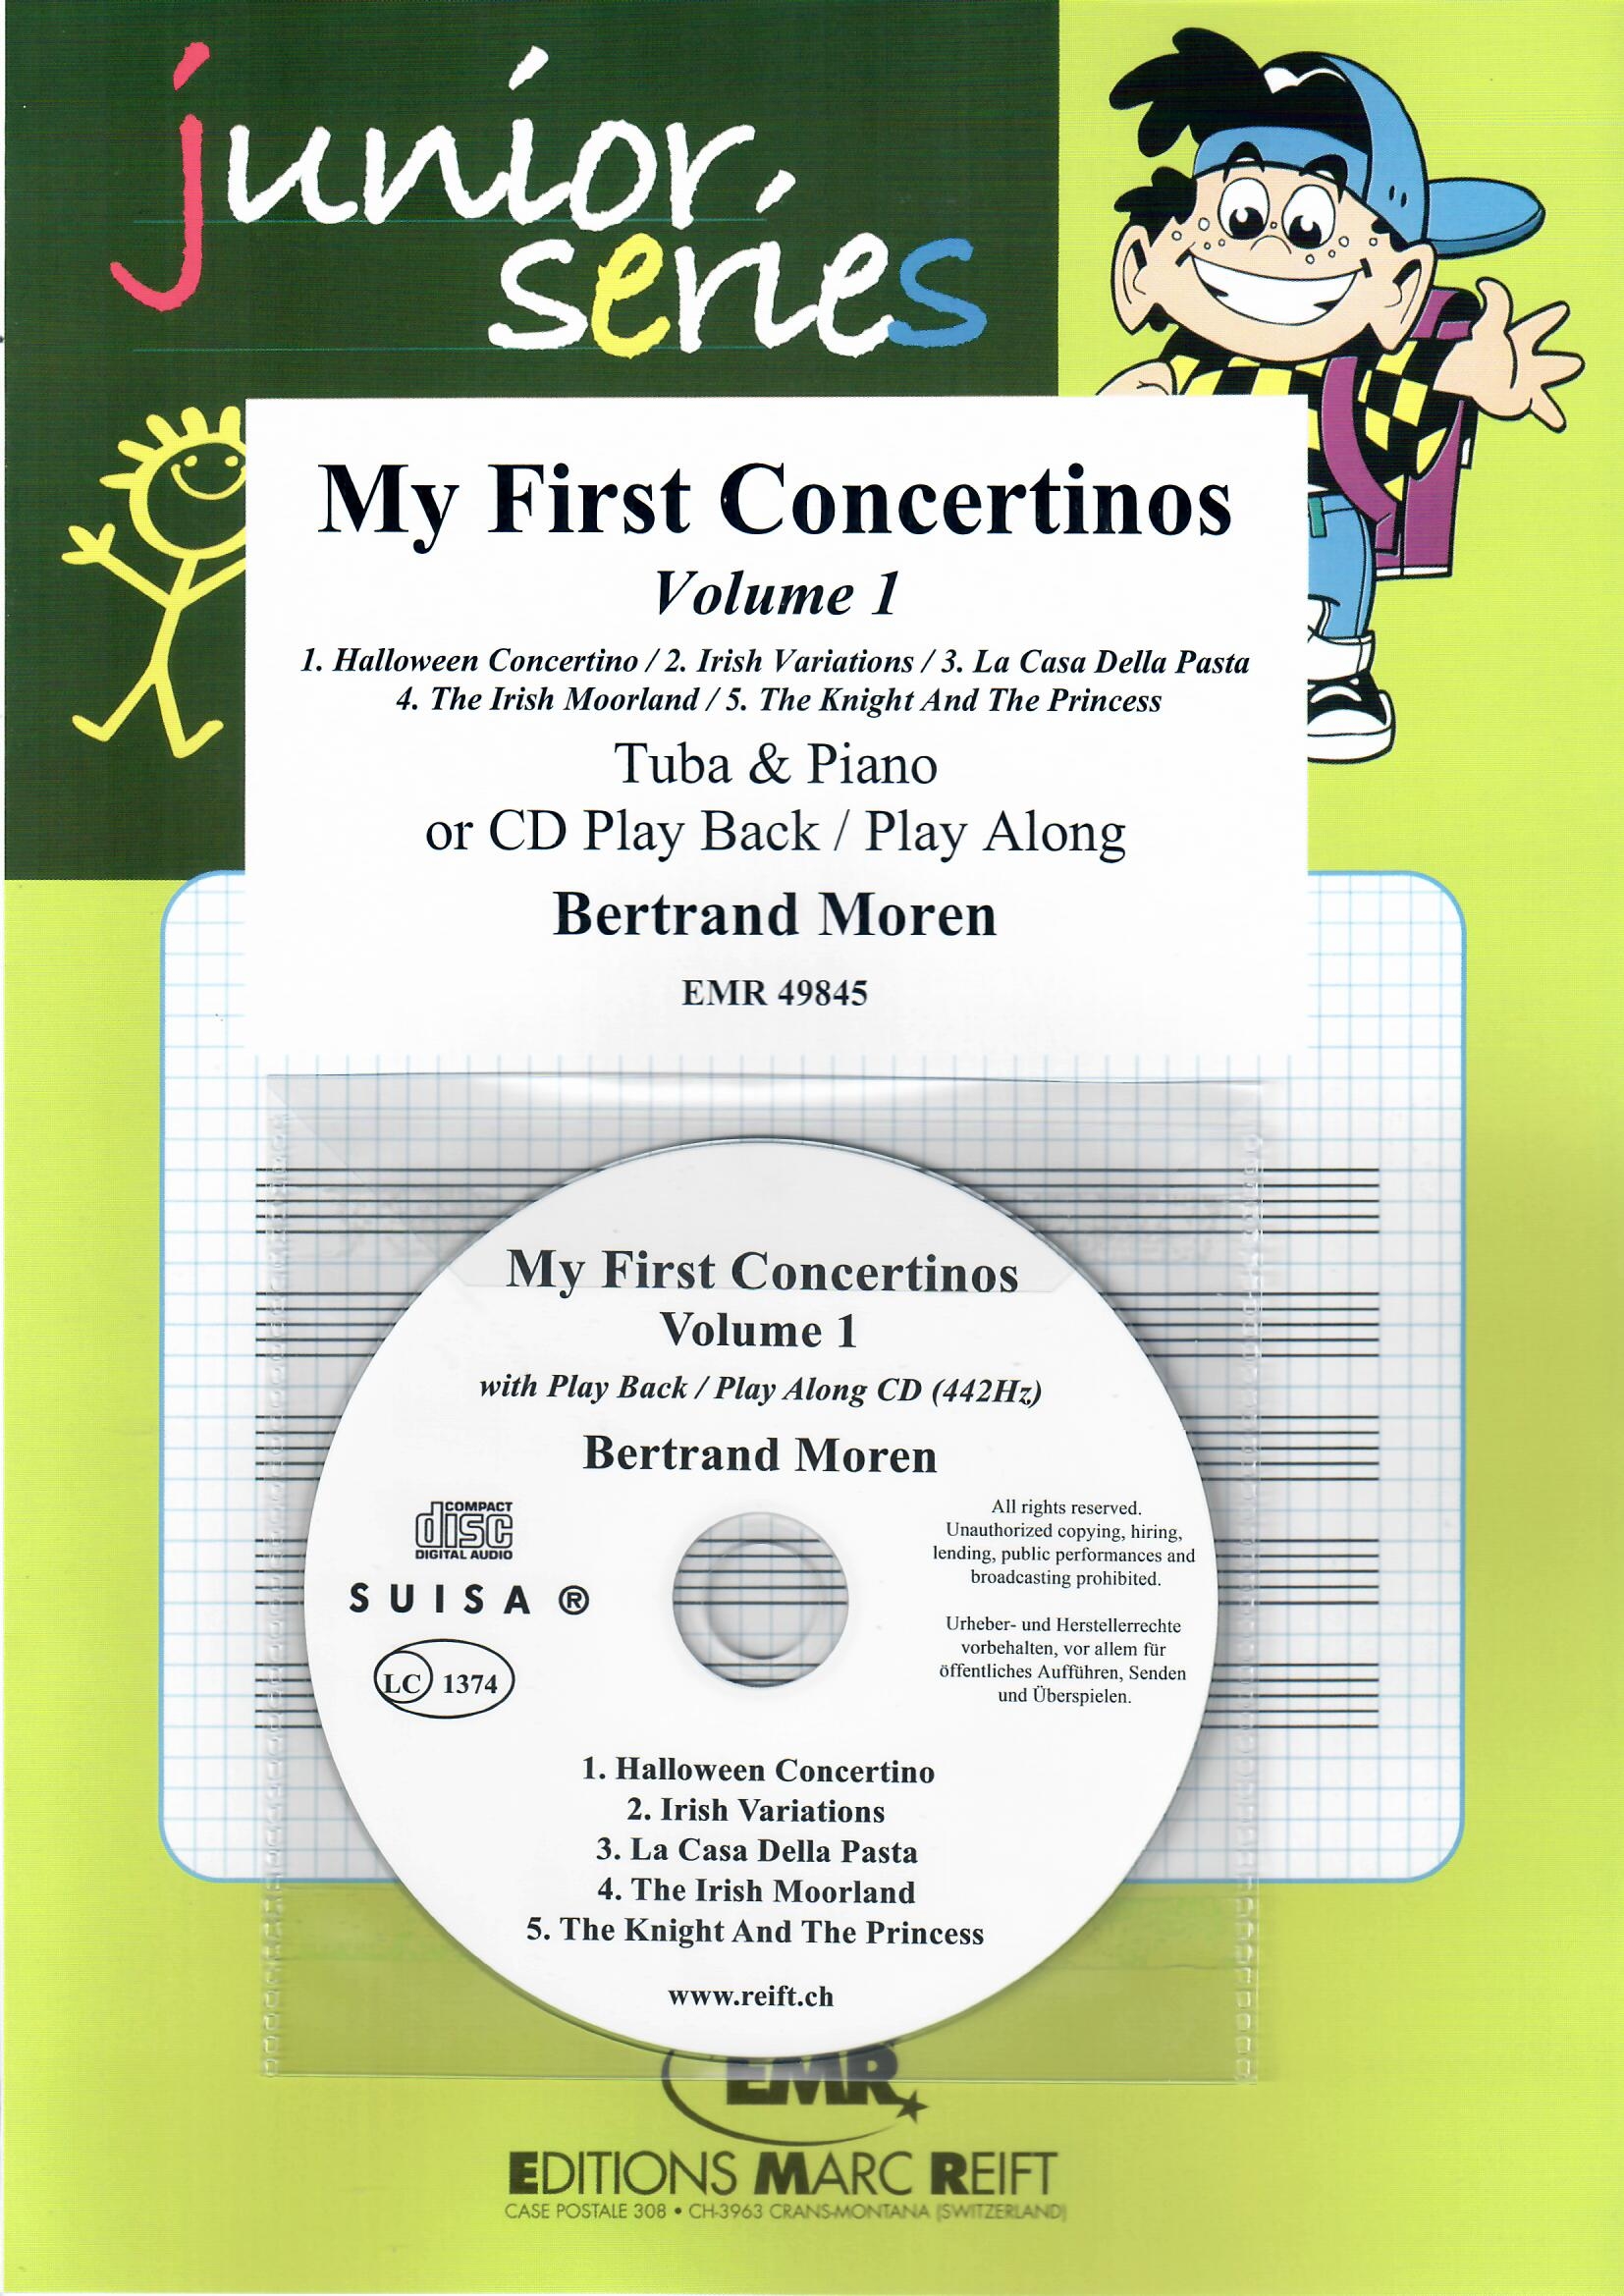 MY FIRST CONCERTINOS VOLUME 1 - Tuba & Piano